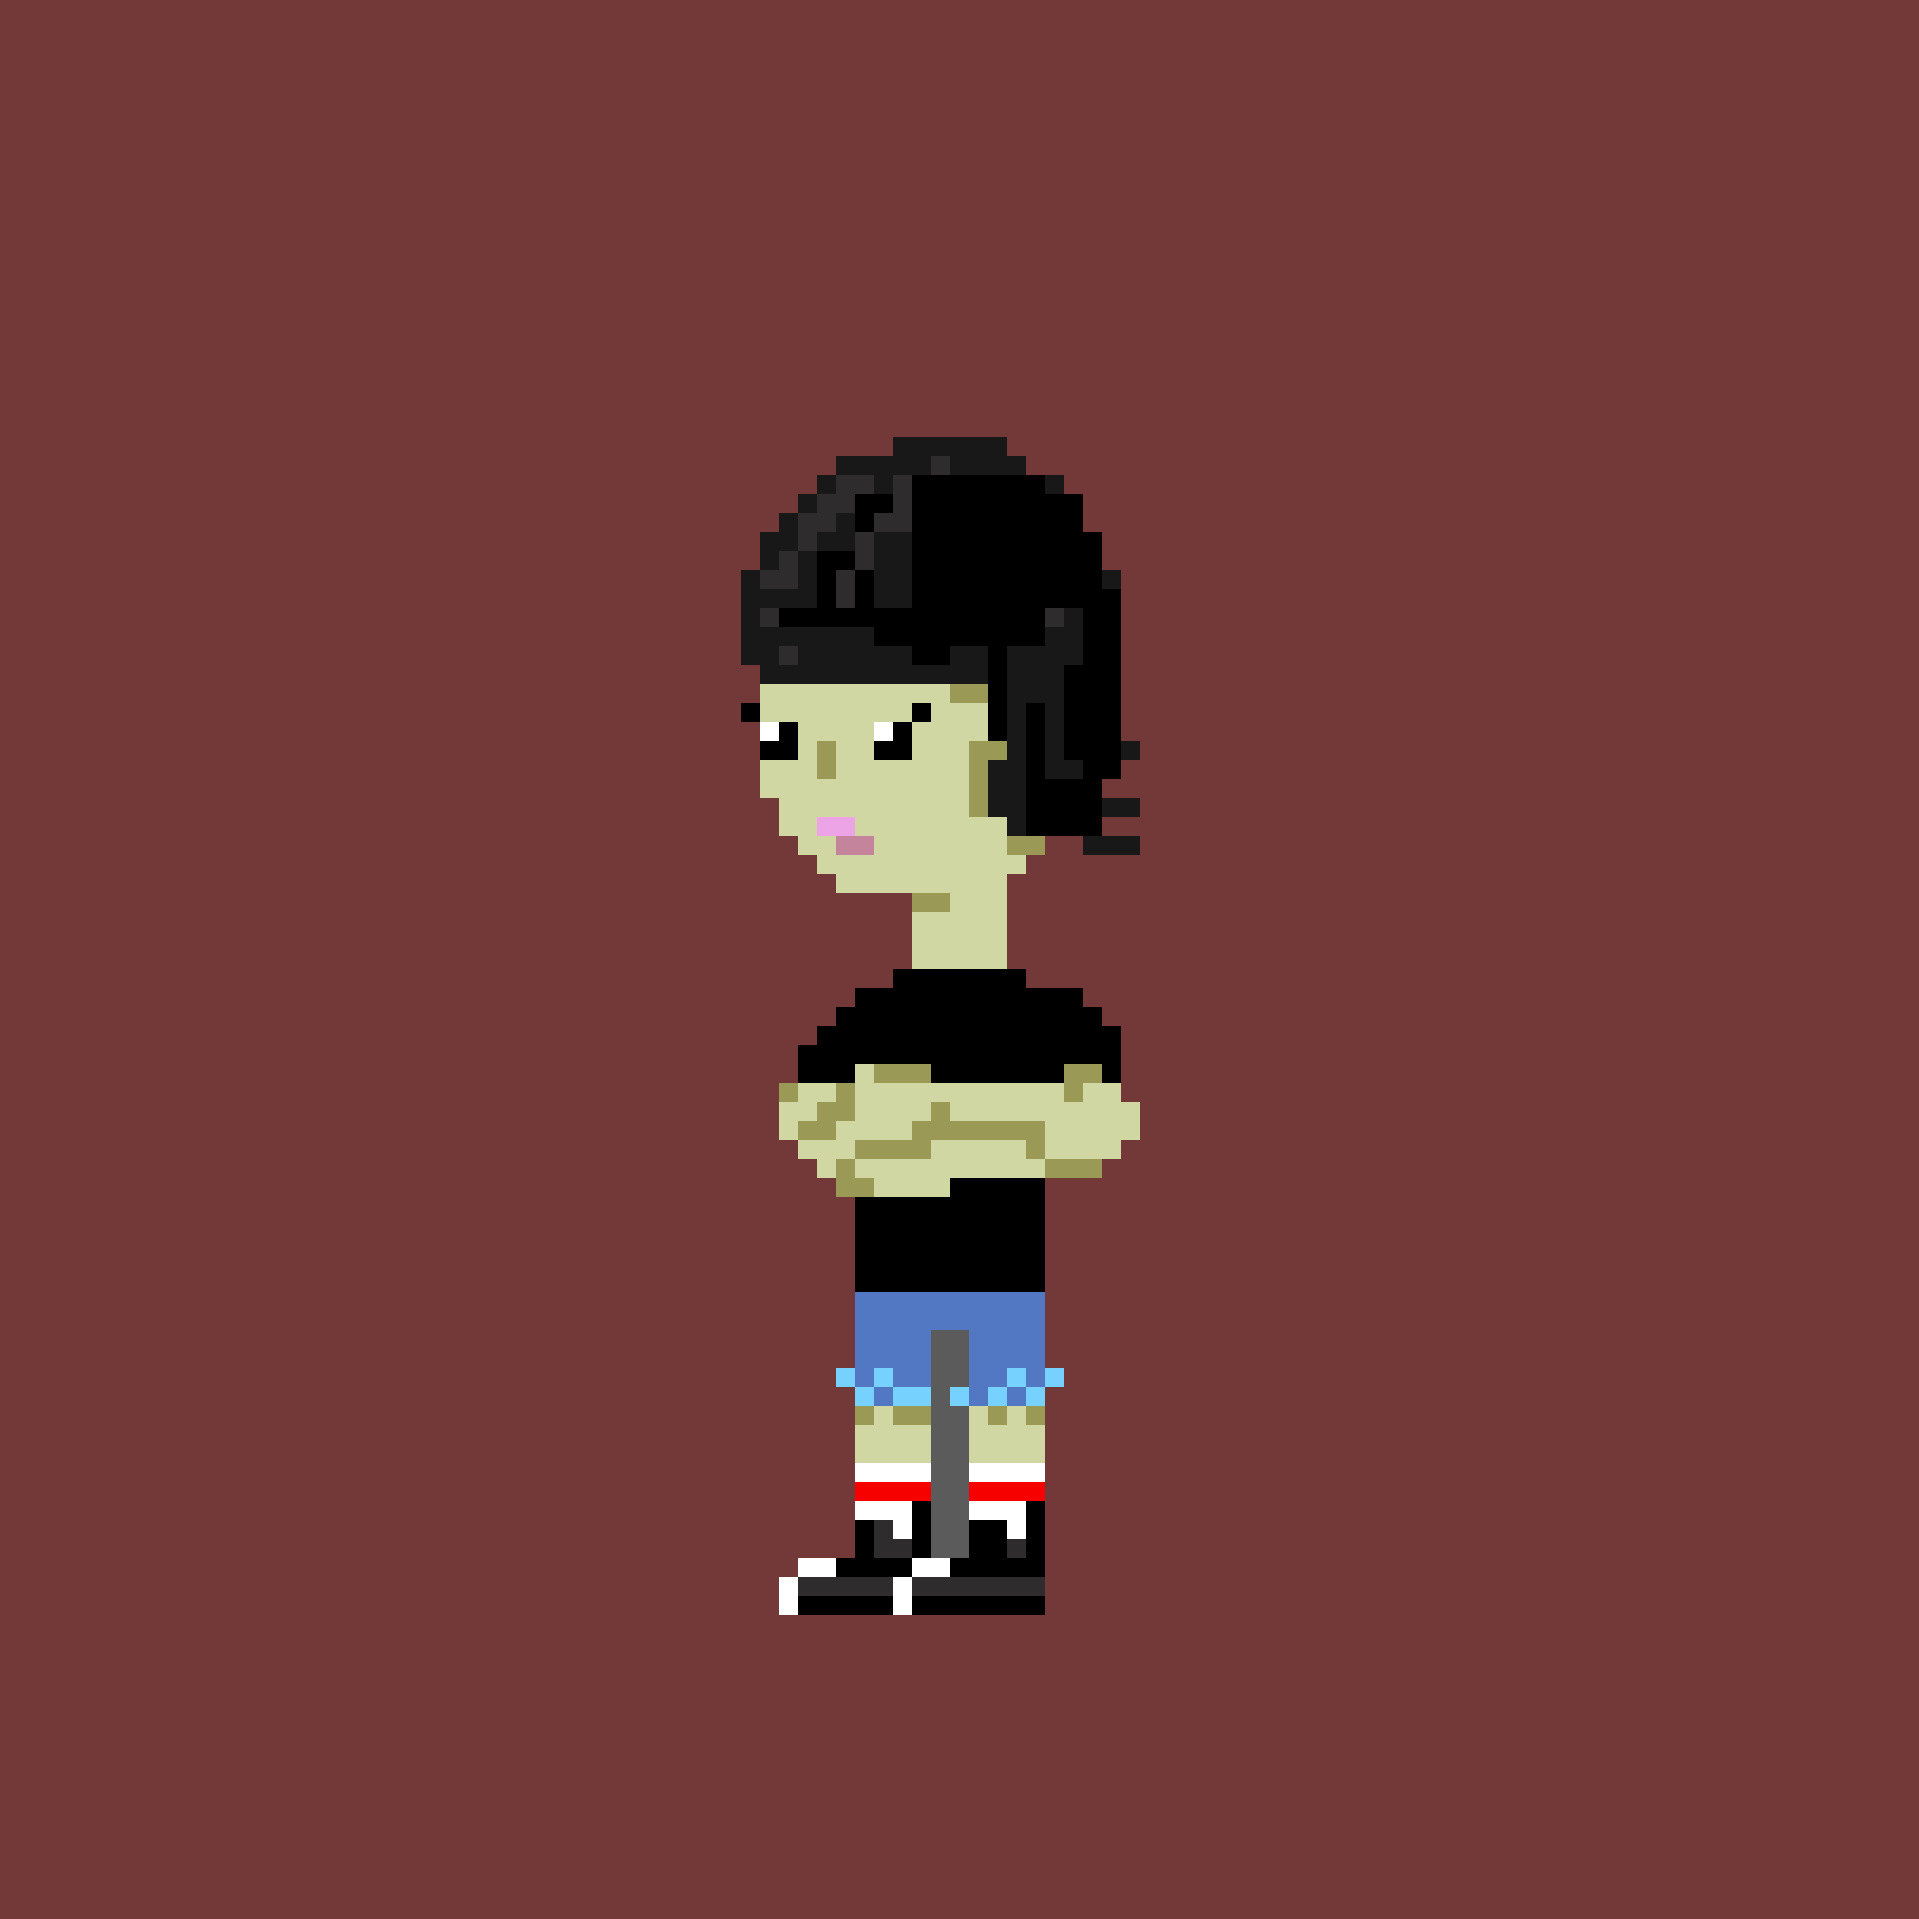   The Little Girl In 8 Bit 2  2020   study for woodcutting  